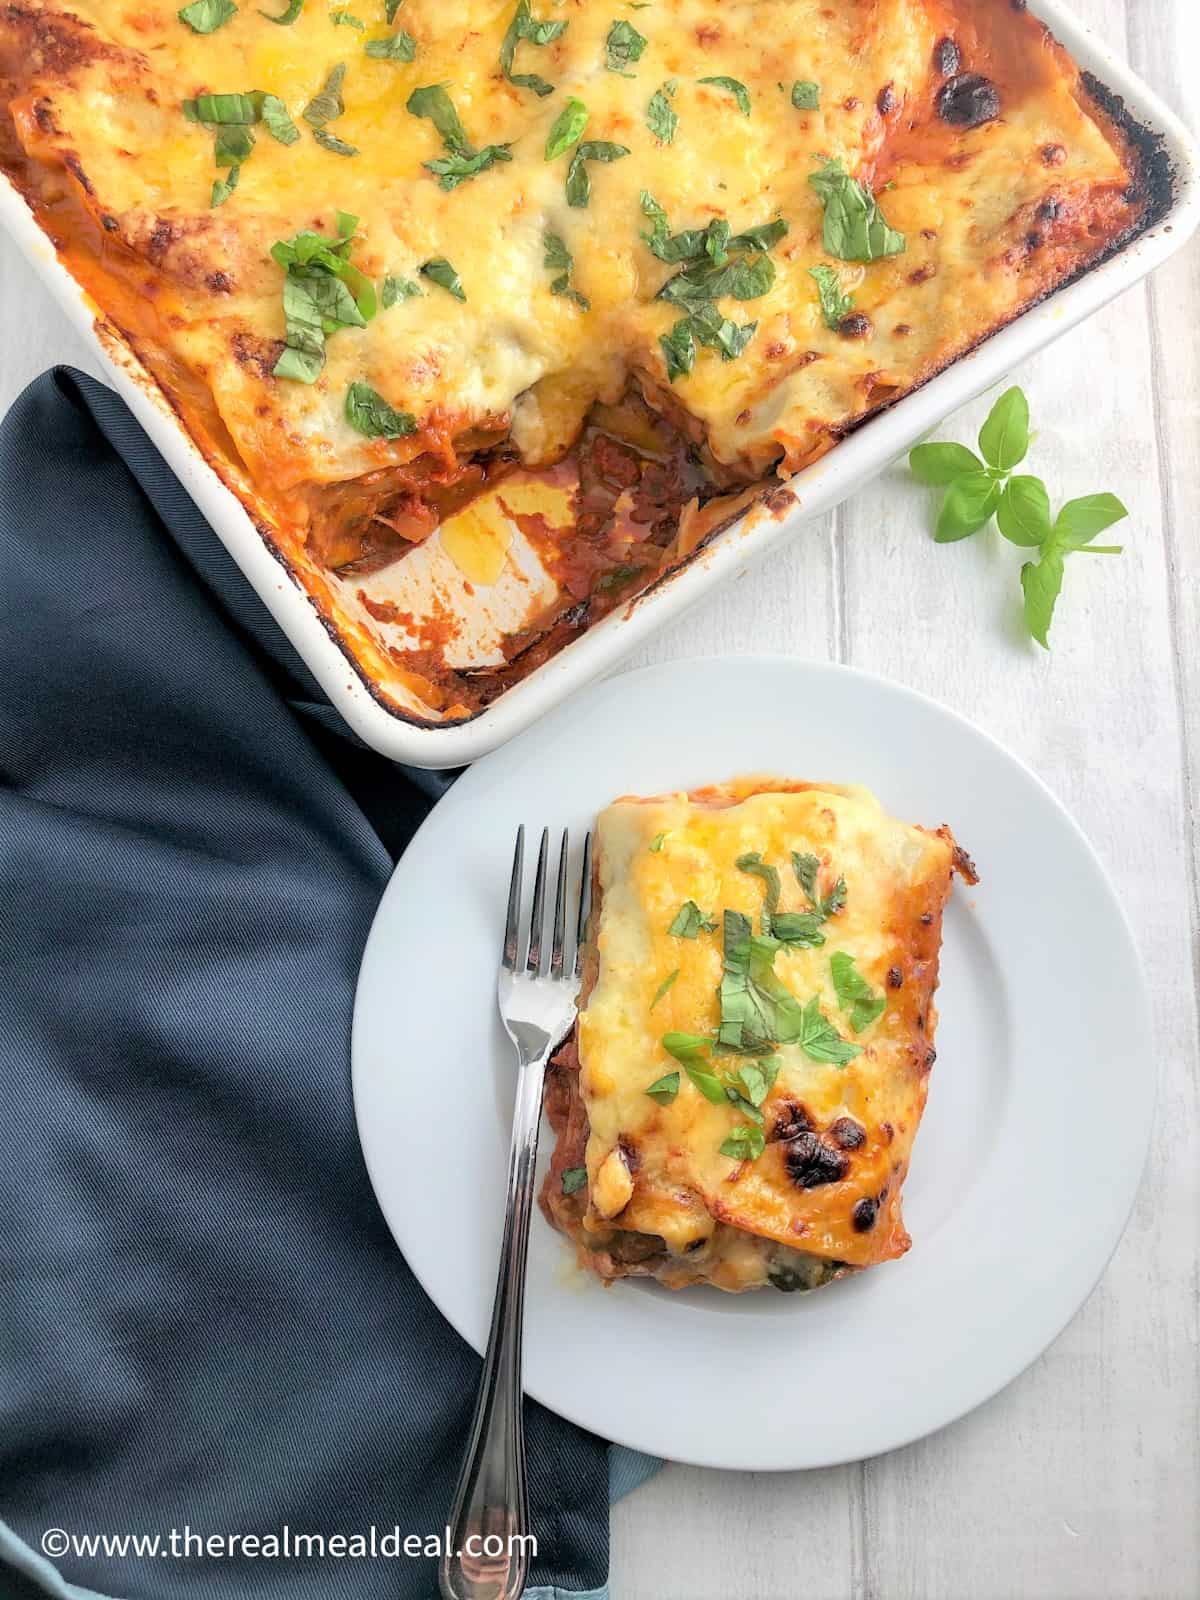 vegetable lasagne in tray with portion plated to side topped with fresh basil leaves